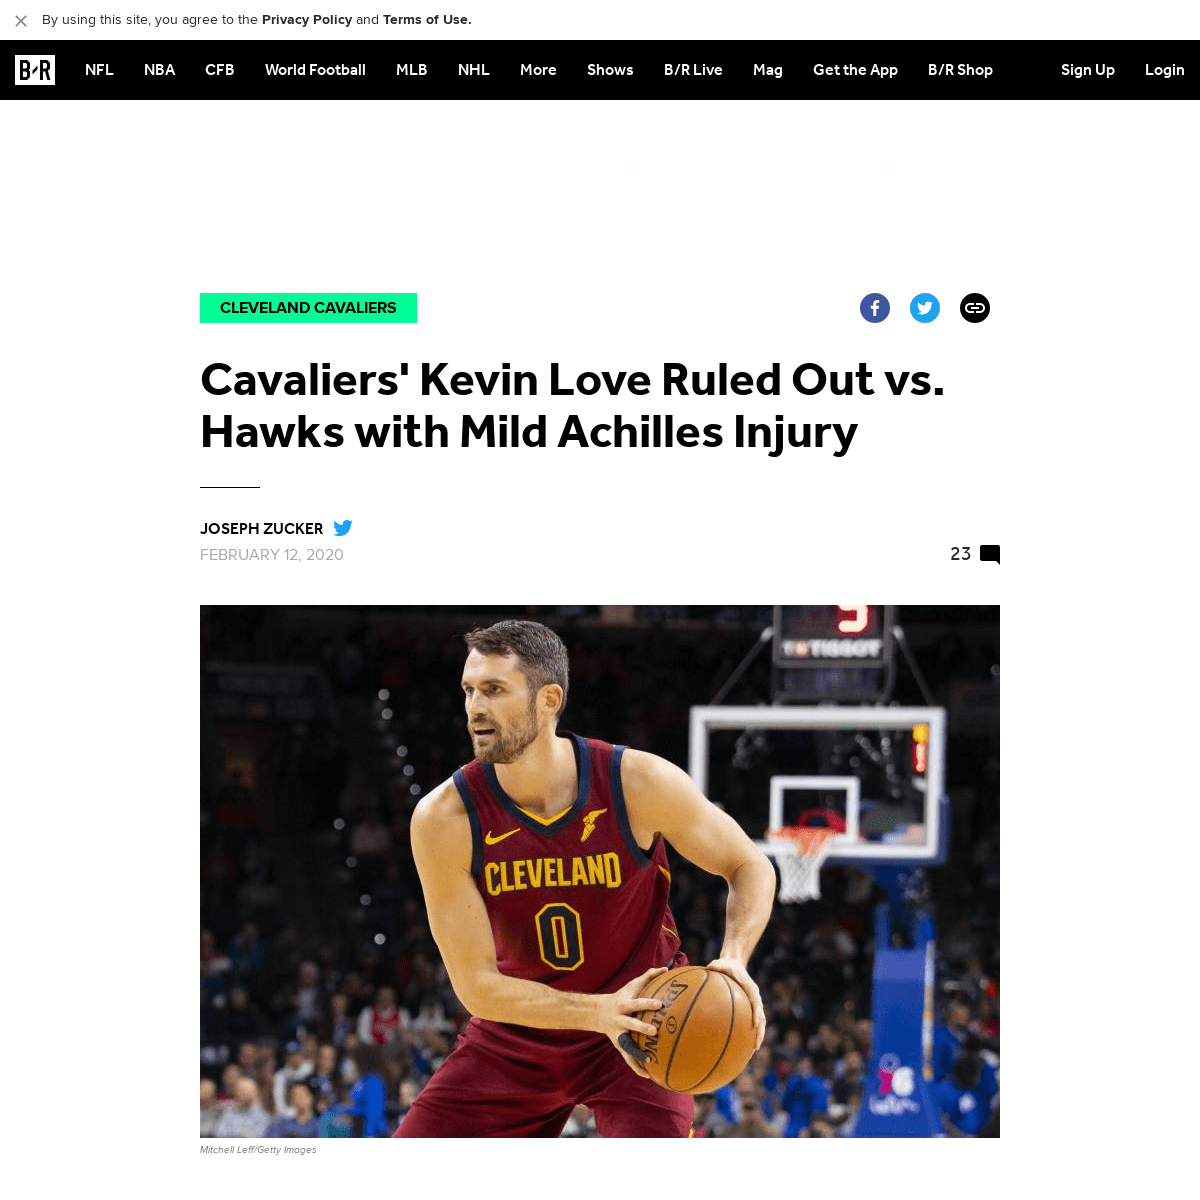 A complete backup of bleacherreport.com/articles/2863317-cavaliers-kevin-love-ruled-out-vs-hawks-with-mild-achilles-injury